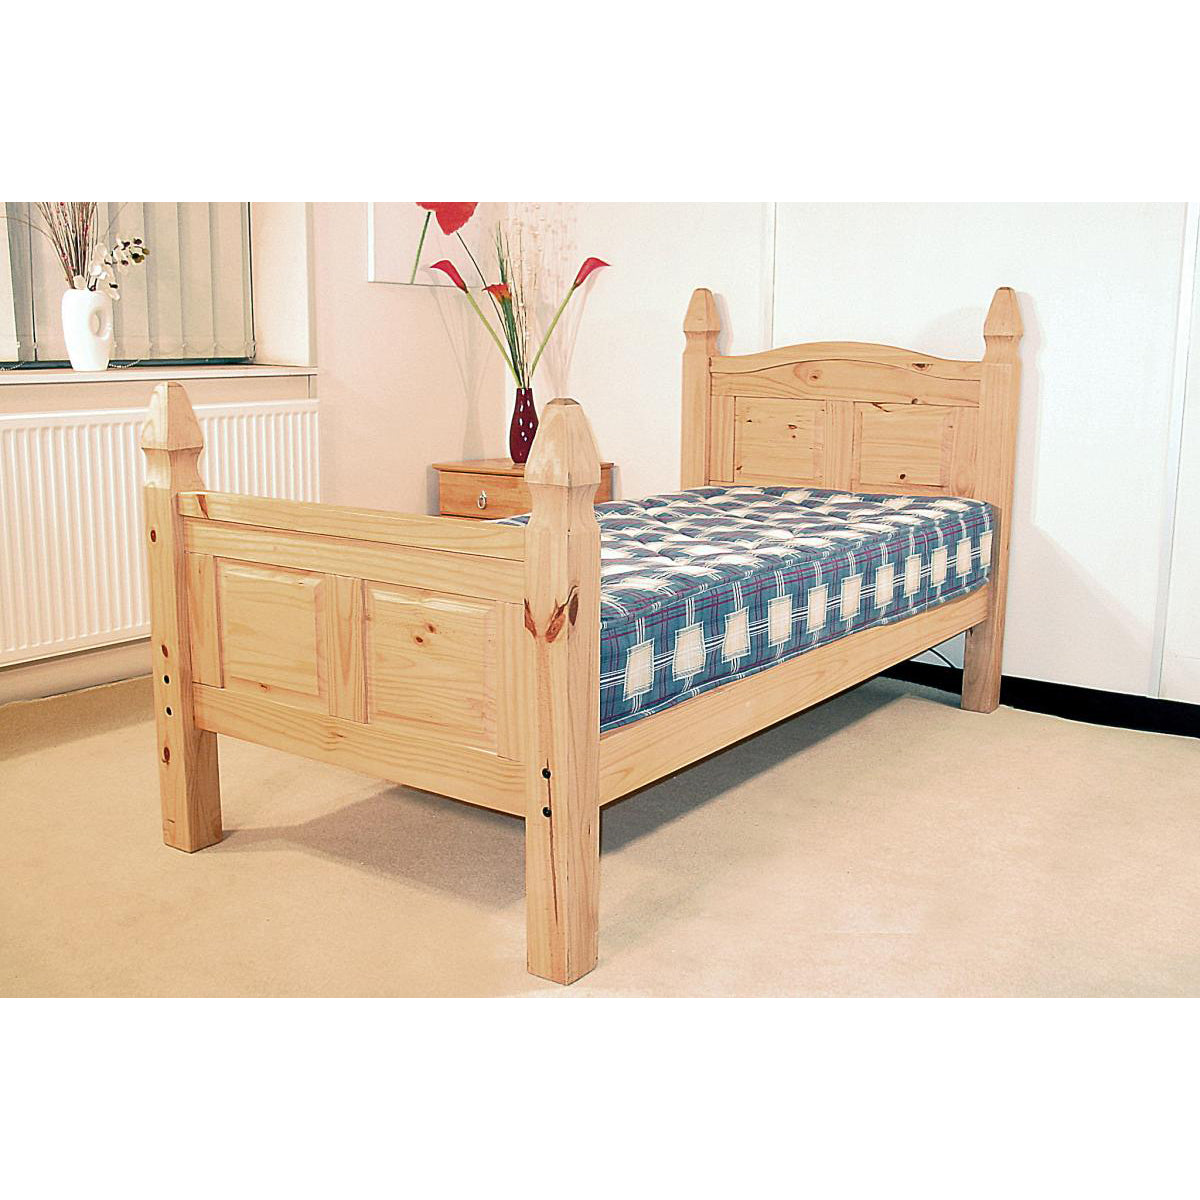 Corona Bed King Size High Foot End